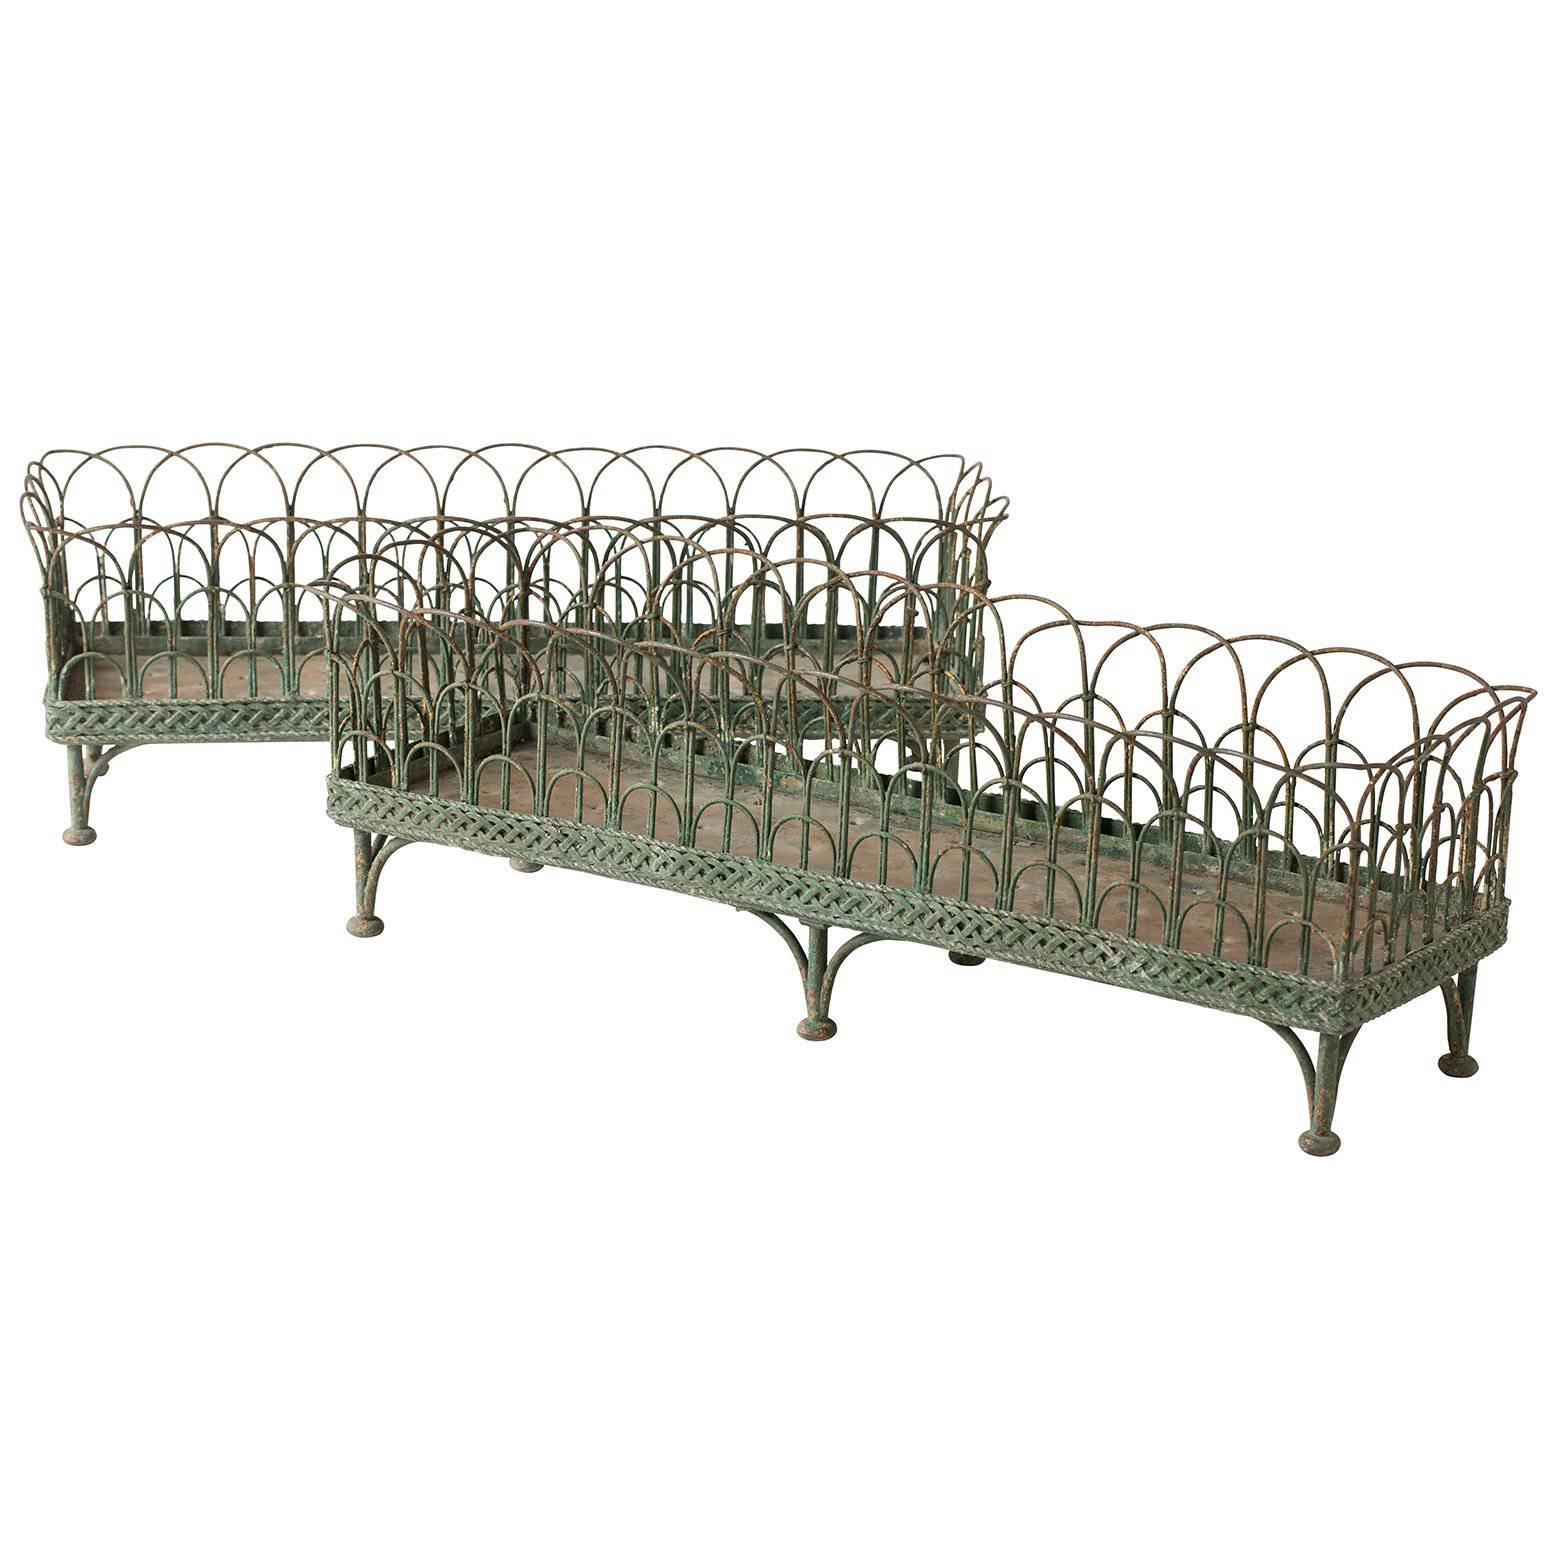 Pair of French Wrought Iron and Wirework Jardinieres, circa 1850